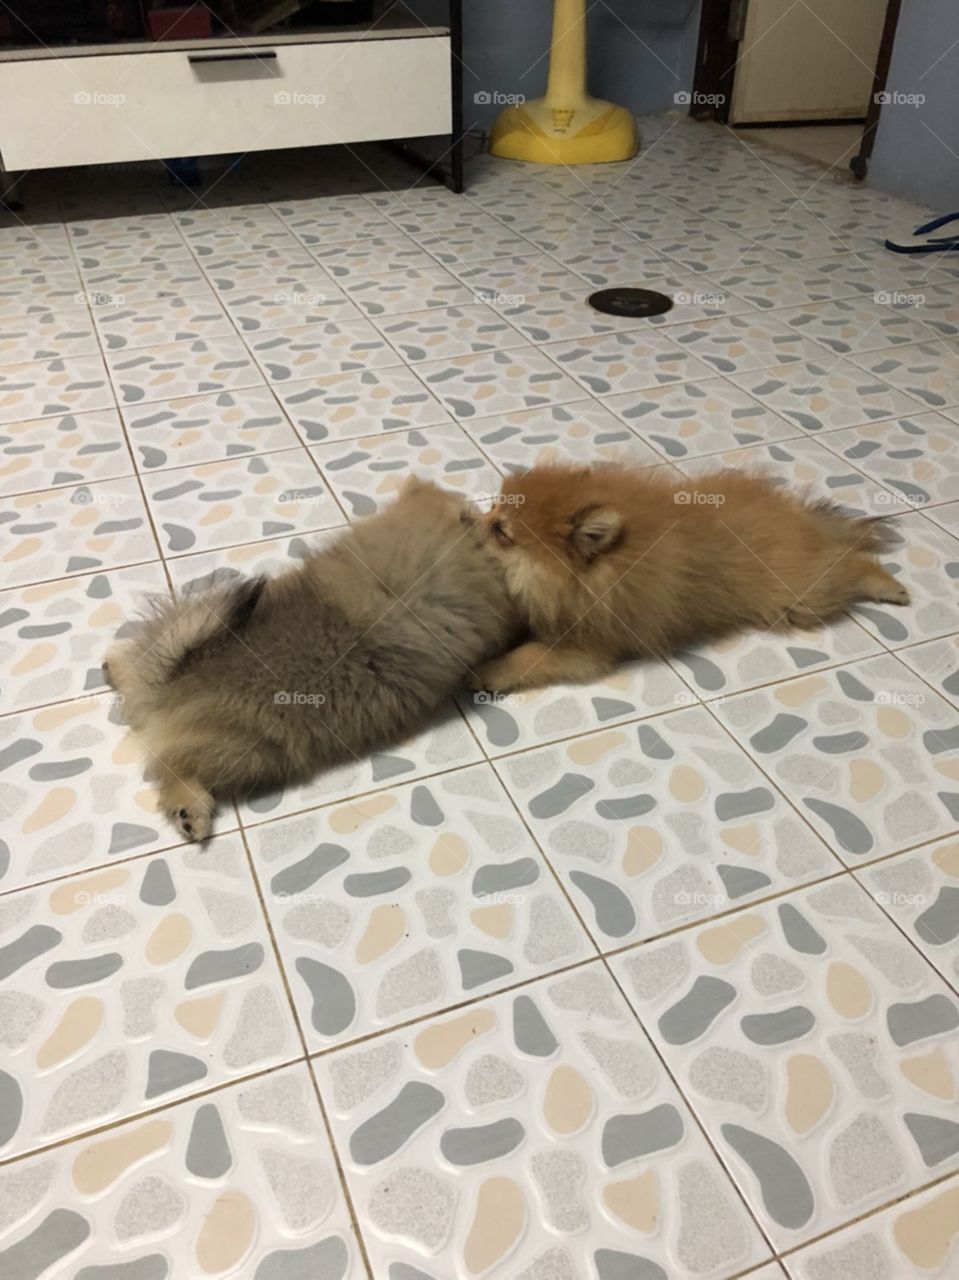 two naughty puppy "pomeranian" sitting comfortably turned their heads face to face.